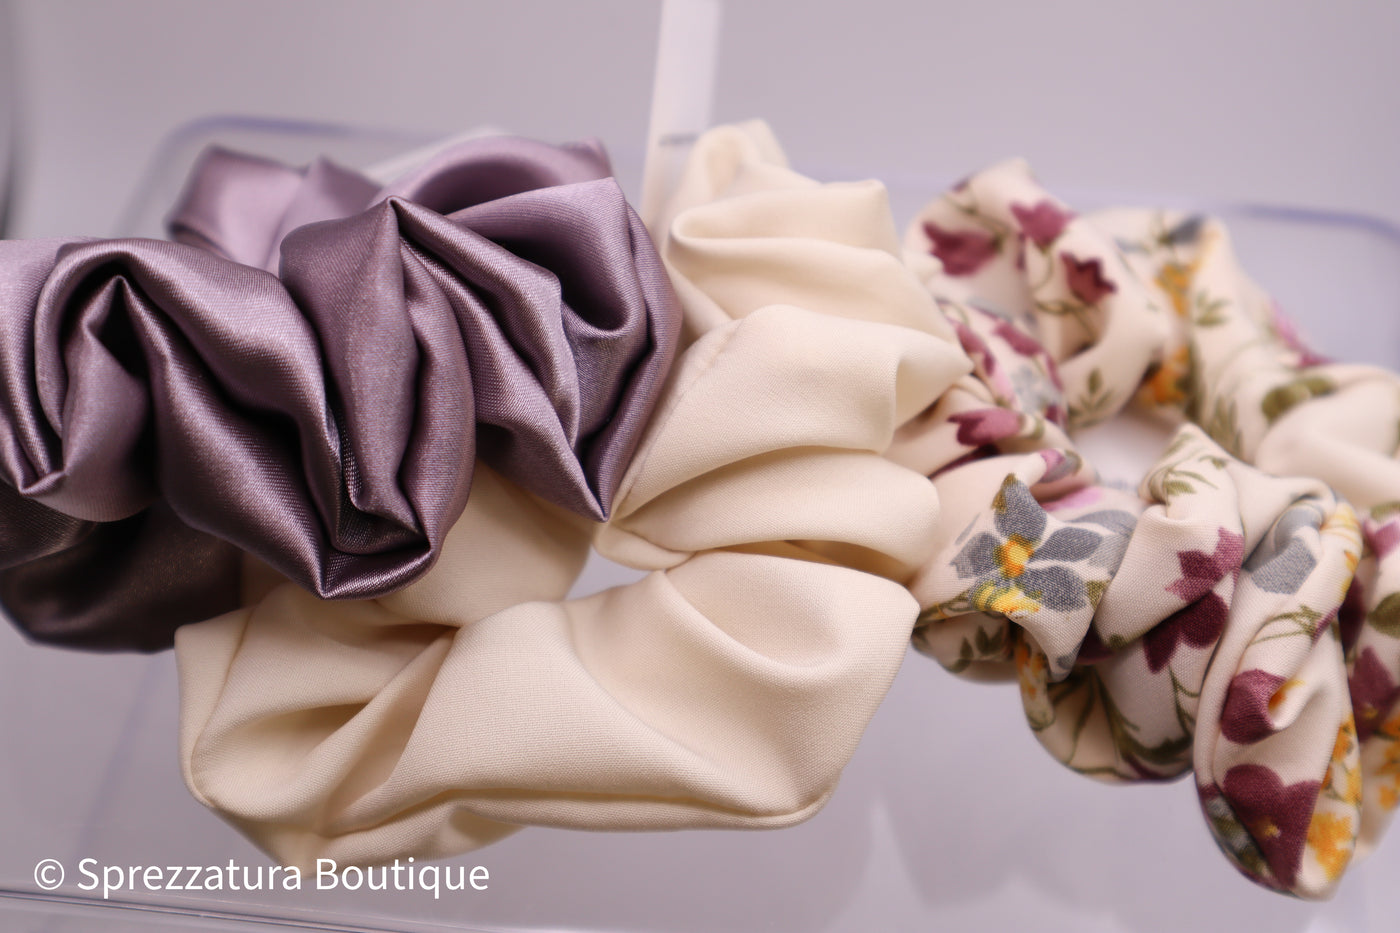 floral cream lavender satin hair scrunchies made by hand with love locally New England woman owned business. Modern smart causal female chic effortless outfit womens ladies gift elegant effortless clothing clothes apparel outfits chic summer style women’s boutique trendy cute wedding guest outfit dress plus size